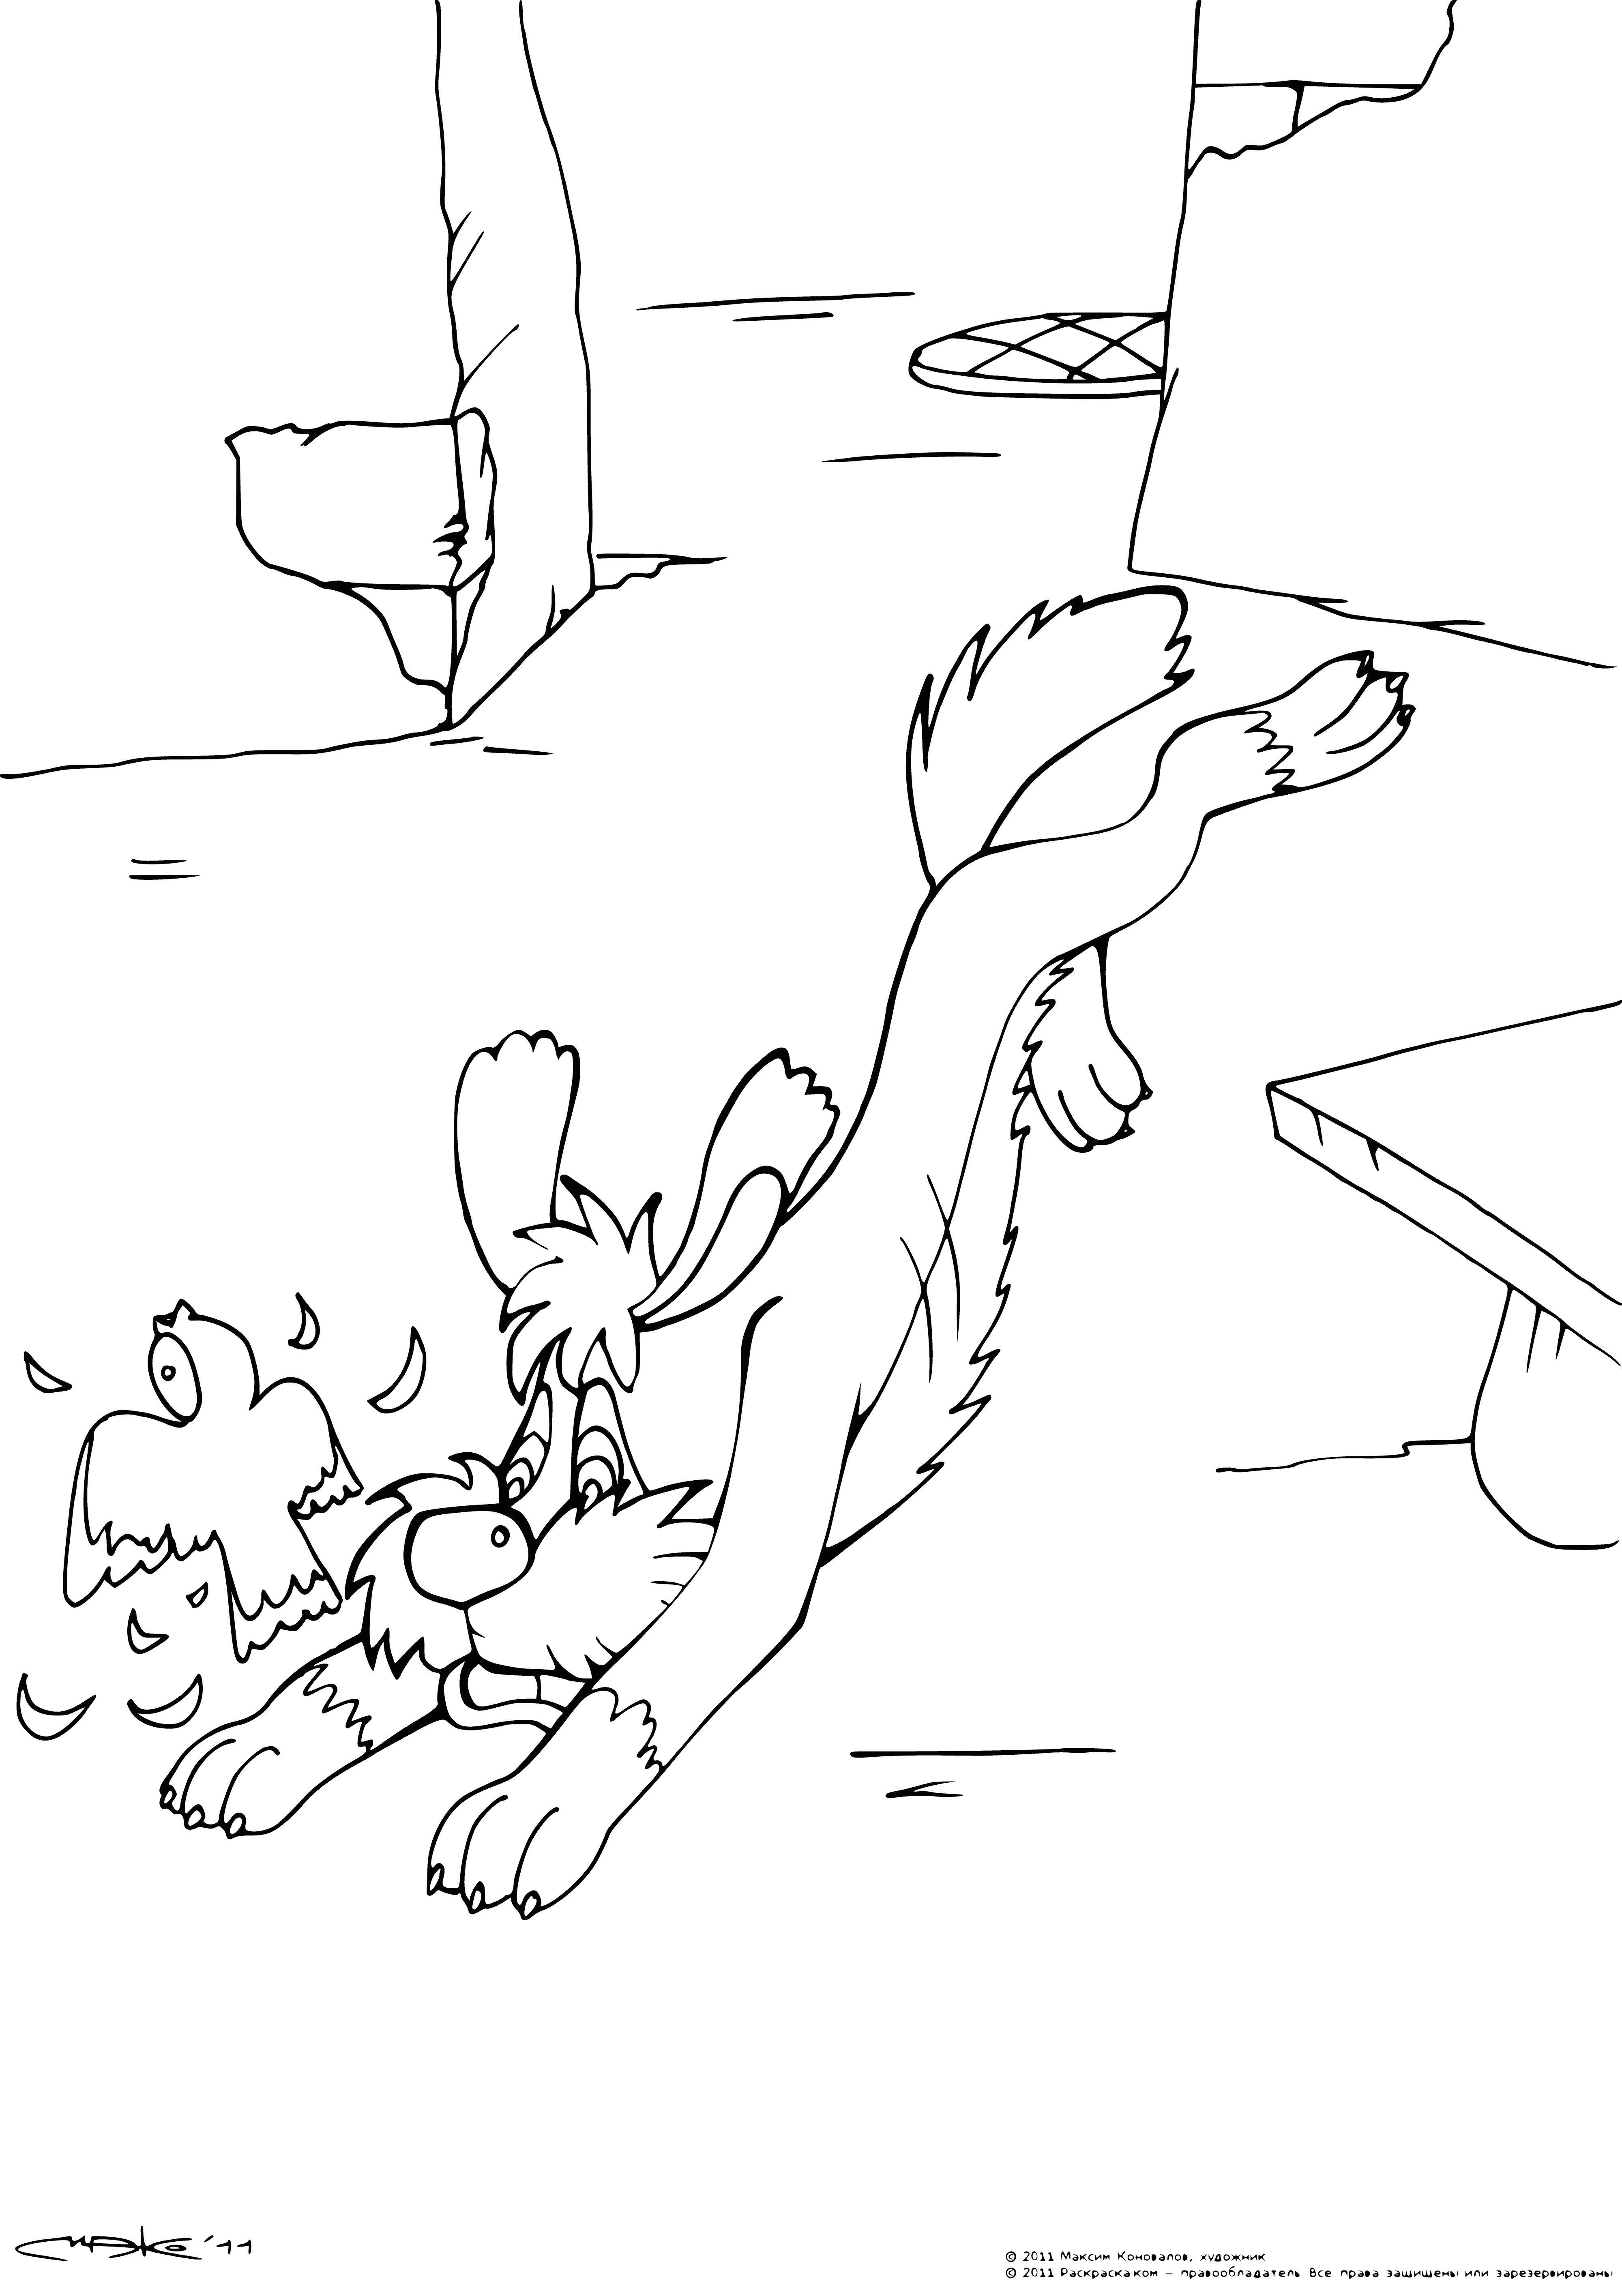 coloring page: Two dogs: small one is panting, big one is barking.